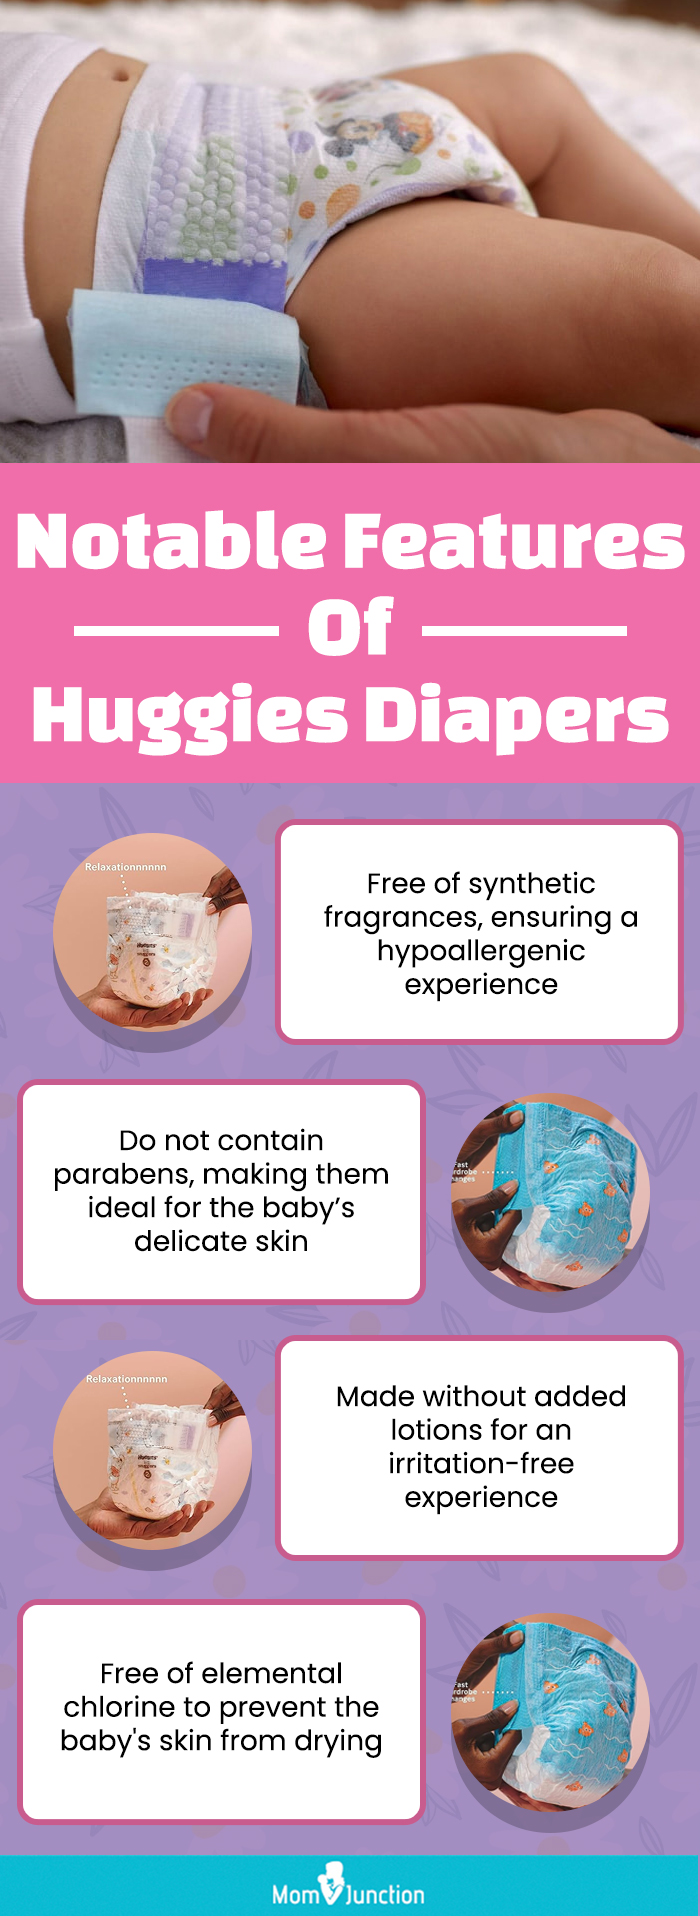 Notable Features Of Huggies Diapers (infographic)